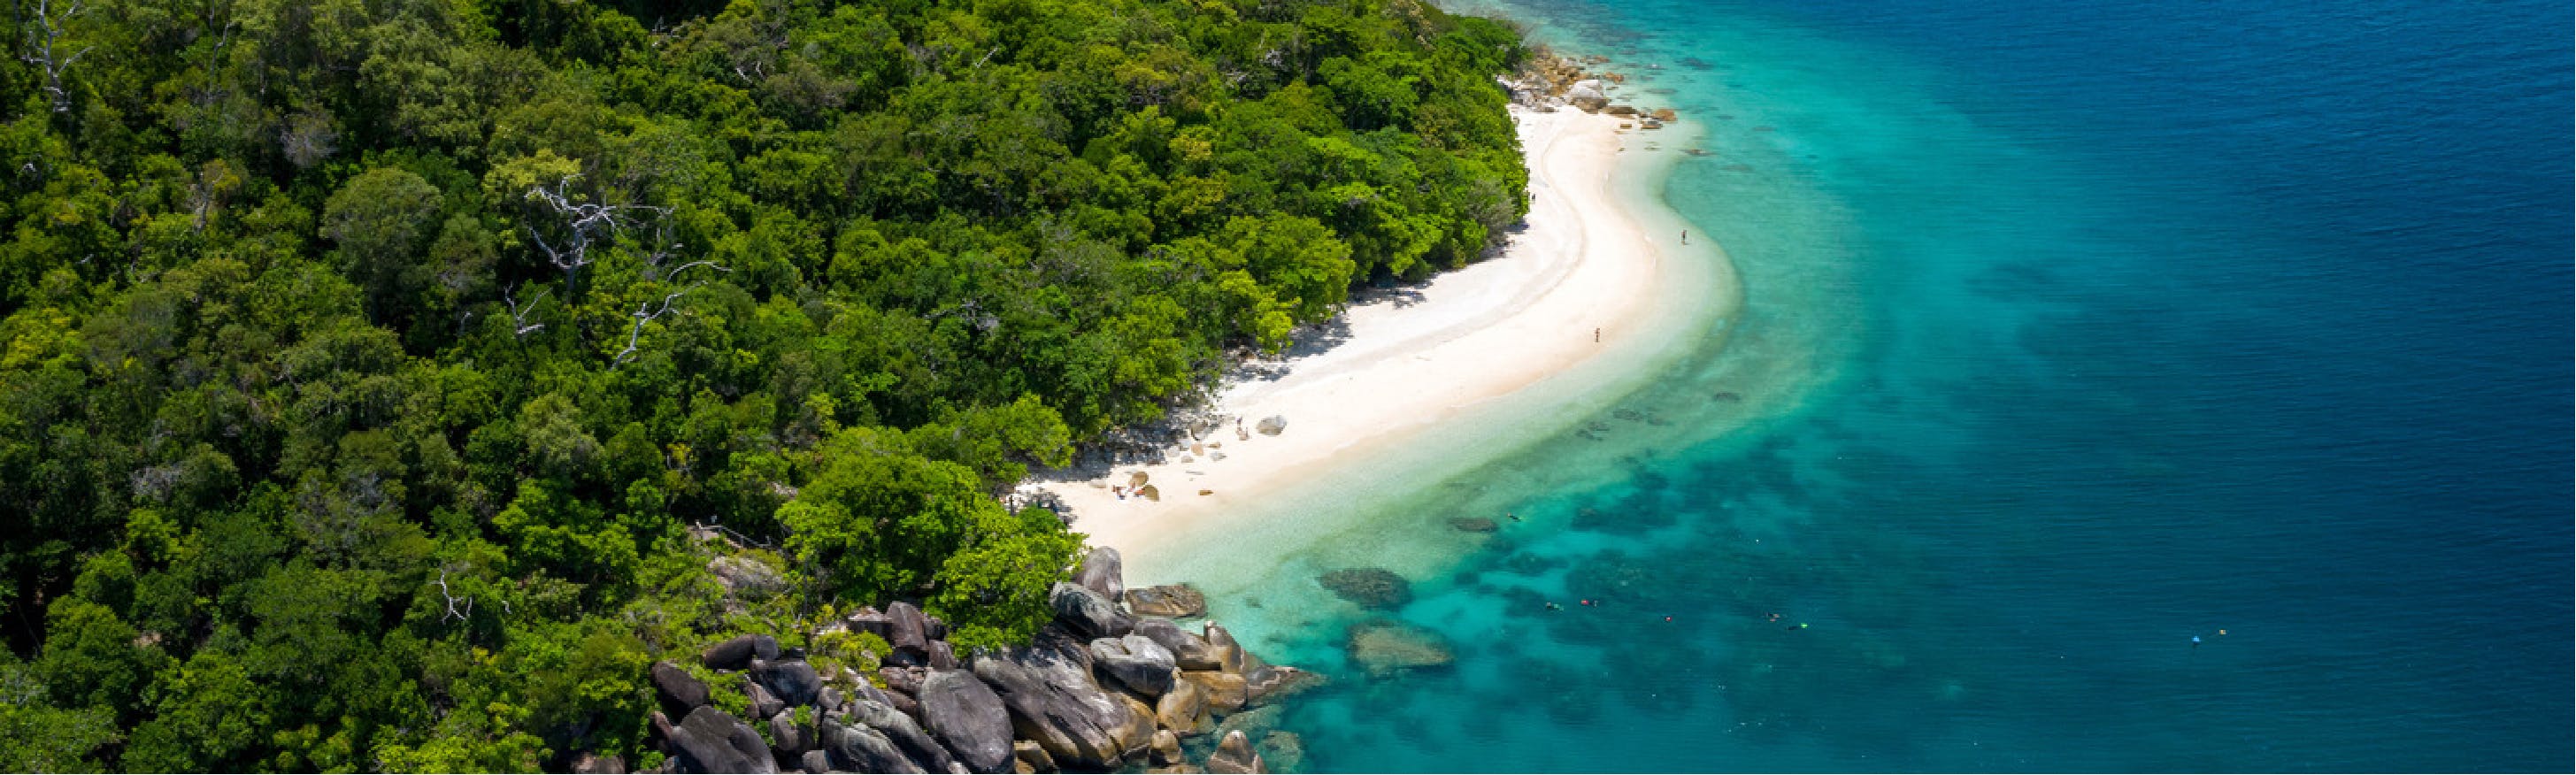 Fitzroy Island adventures full day tour Musement